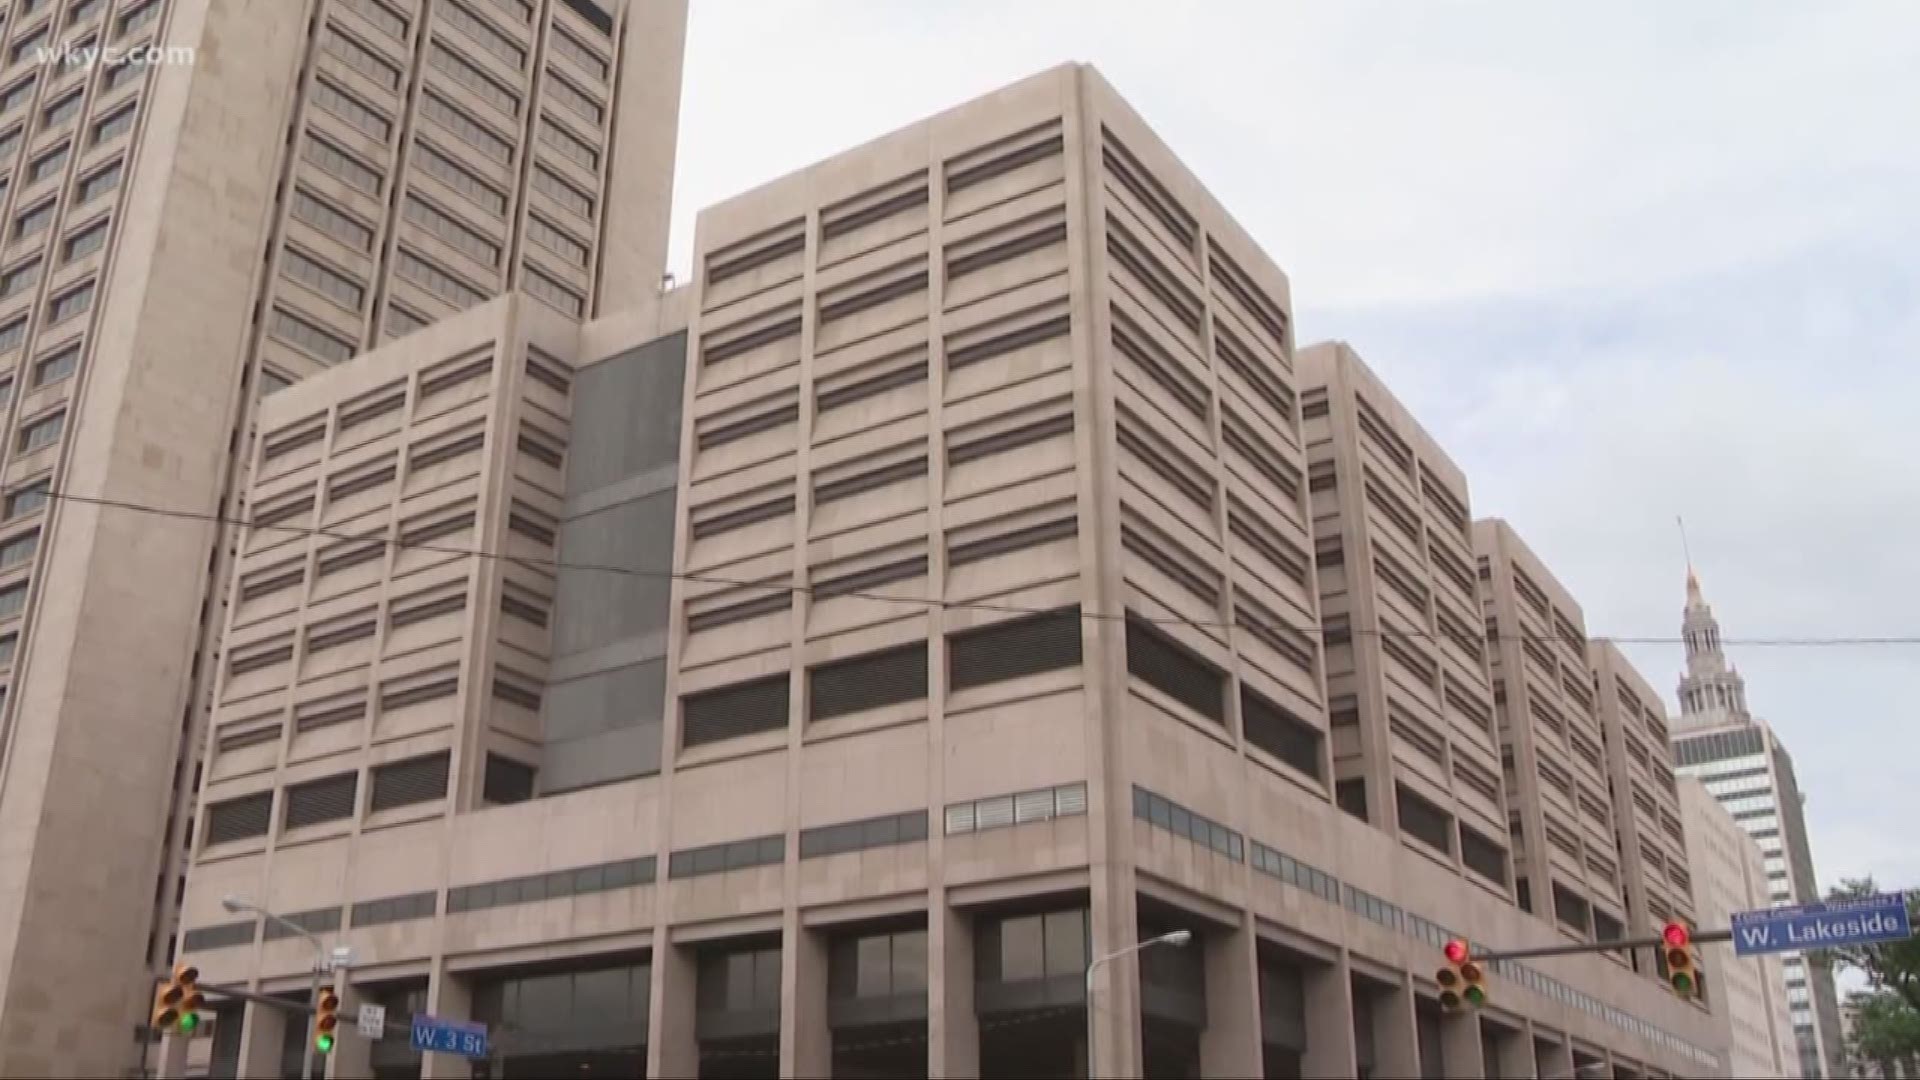 Class-action lawsuit filed over Cuyahoga County Jail conditions